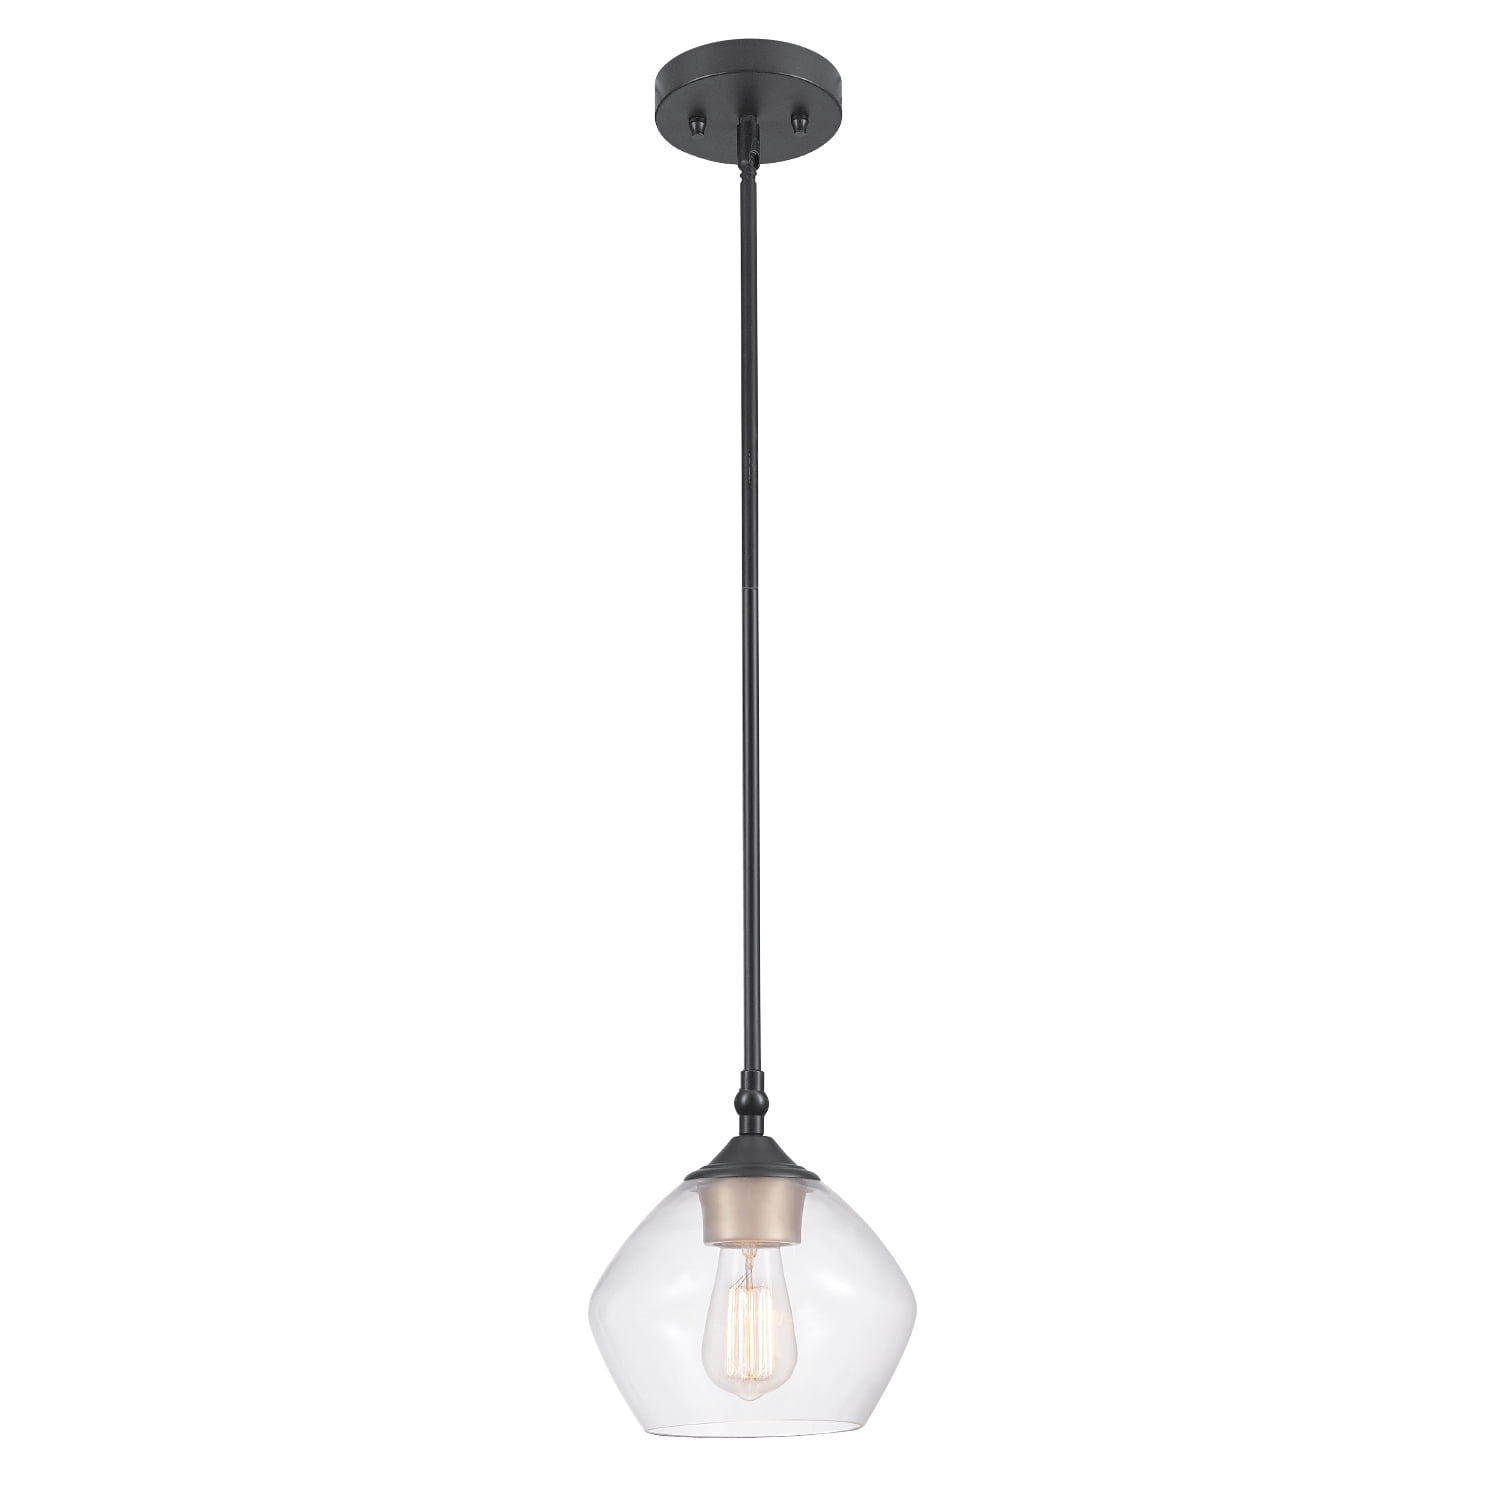 Picture of Globe Electric 3008643 59.6 x 8 x 8 in. Harrow Ceiling Light, Matte Black